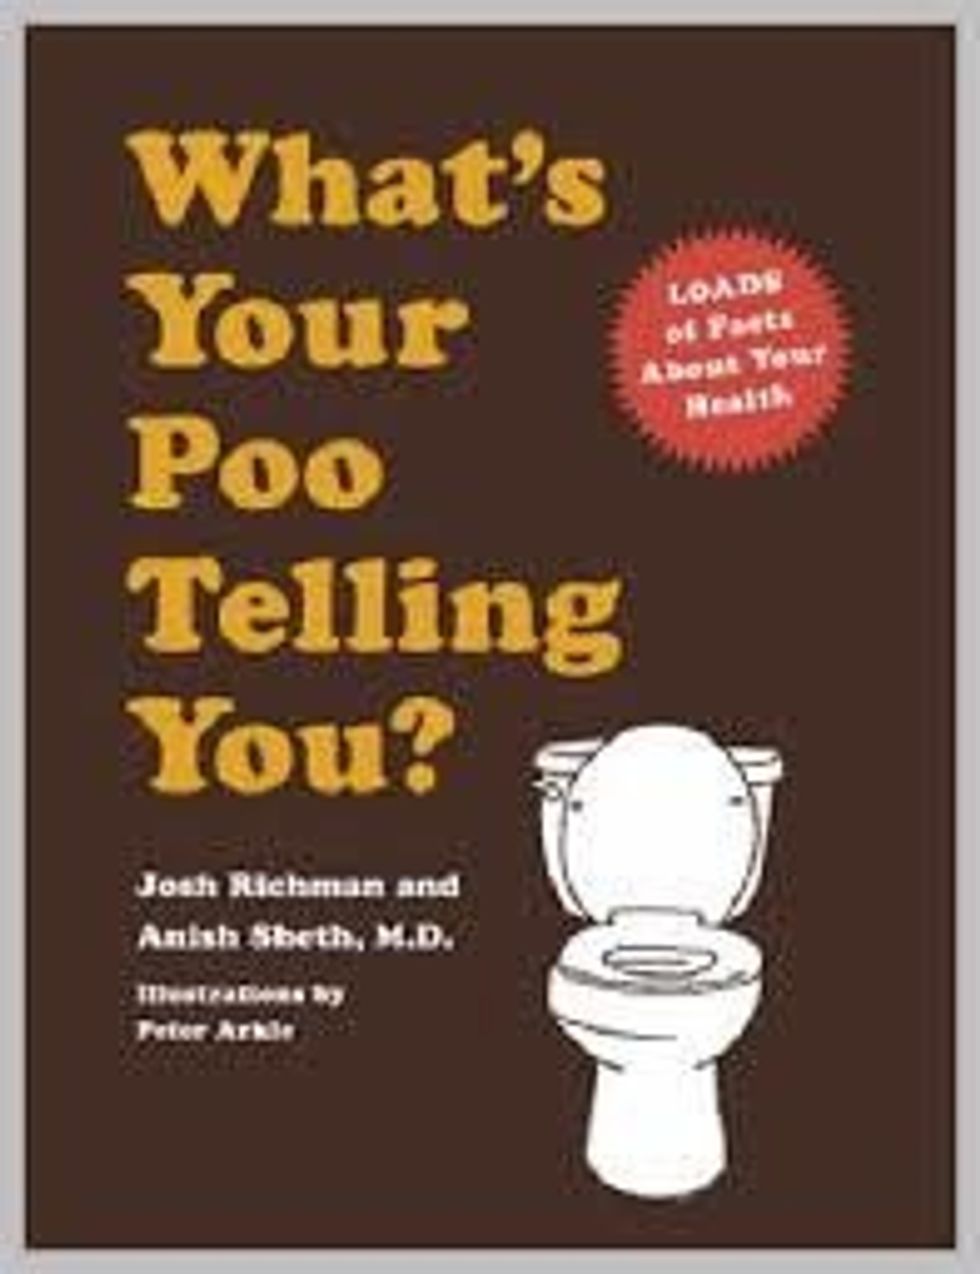 whats your poo telling you book cover